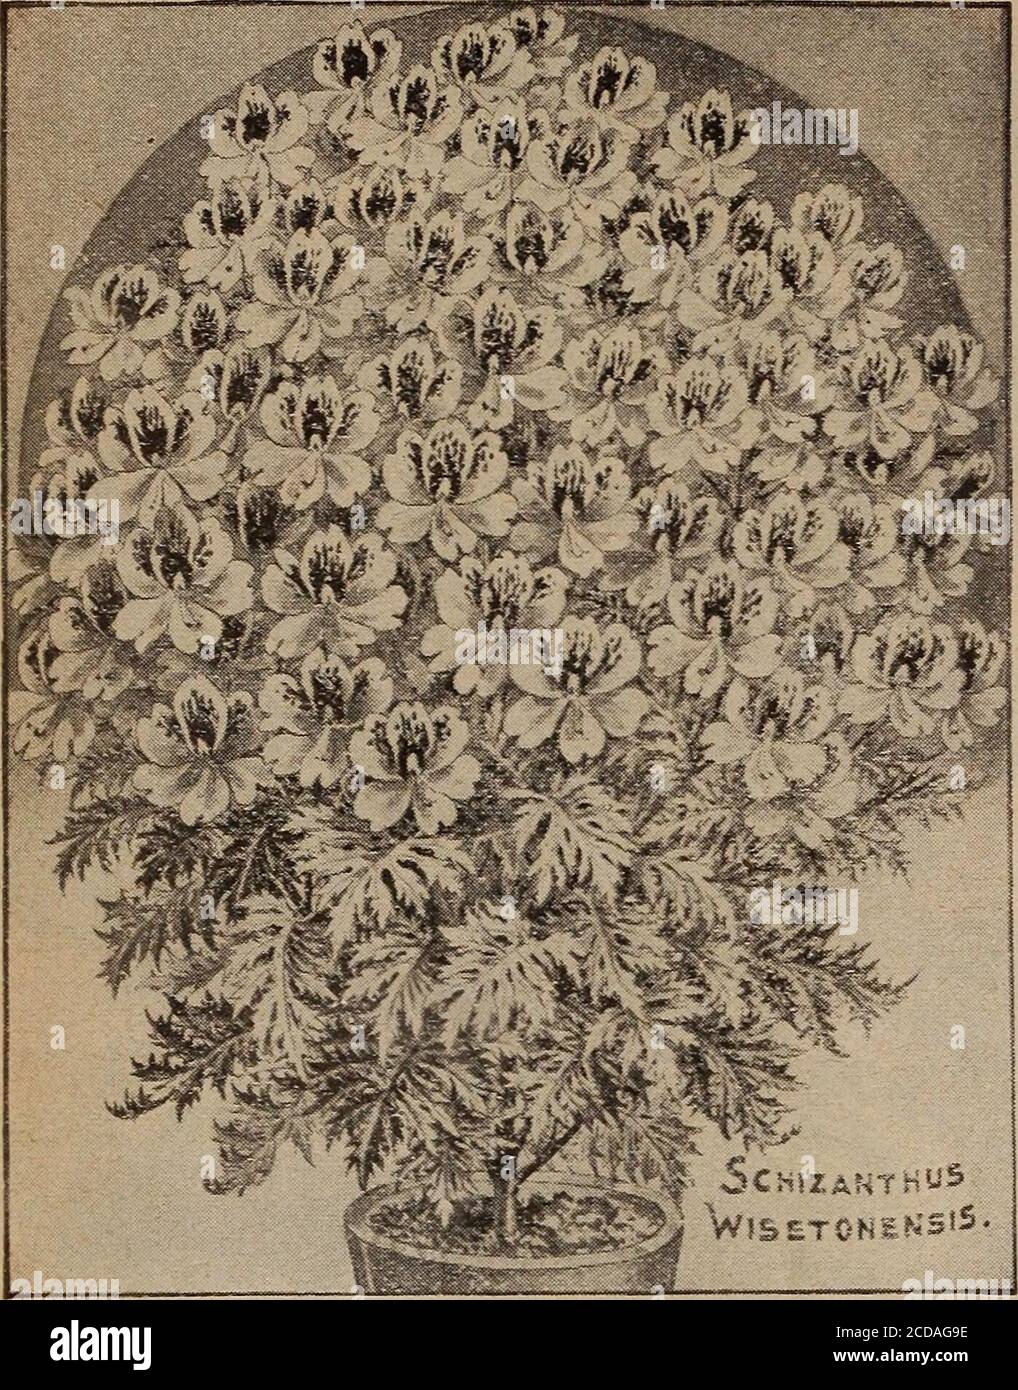 . Childs' spring 1922 : seeds that satisfy plants that please bulbs that bloom berries that bear . 48 JOHN LEWIS CHILDS, INC., FLORAL PARK, NEW YORK. SCHIZANTHUS, Wisetonensis Hybrids Like Beautiful Orchids, Foliage Like Fern Fronds This new Fern-leaved annual has proved to be mostnovel and beautiful. Plants grow freely and the flowersappear in panicles and resemble some species of Orchids.Each flower looks like a beautiful butterfly with spread-ing- wings of delicate and varied color. Best of all, itis easily grown from seed, commencing to bloom inabout two months from the time of sowing. As Stock Photo